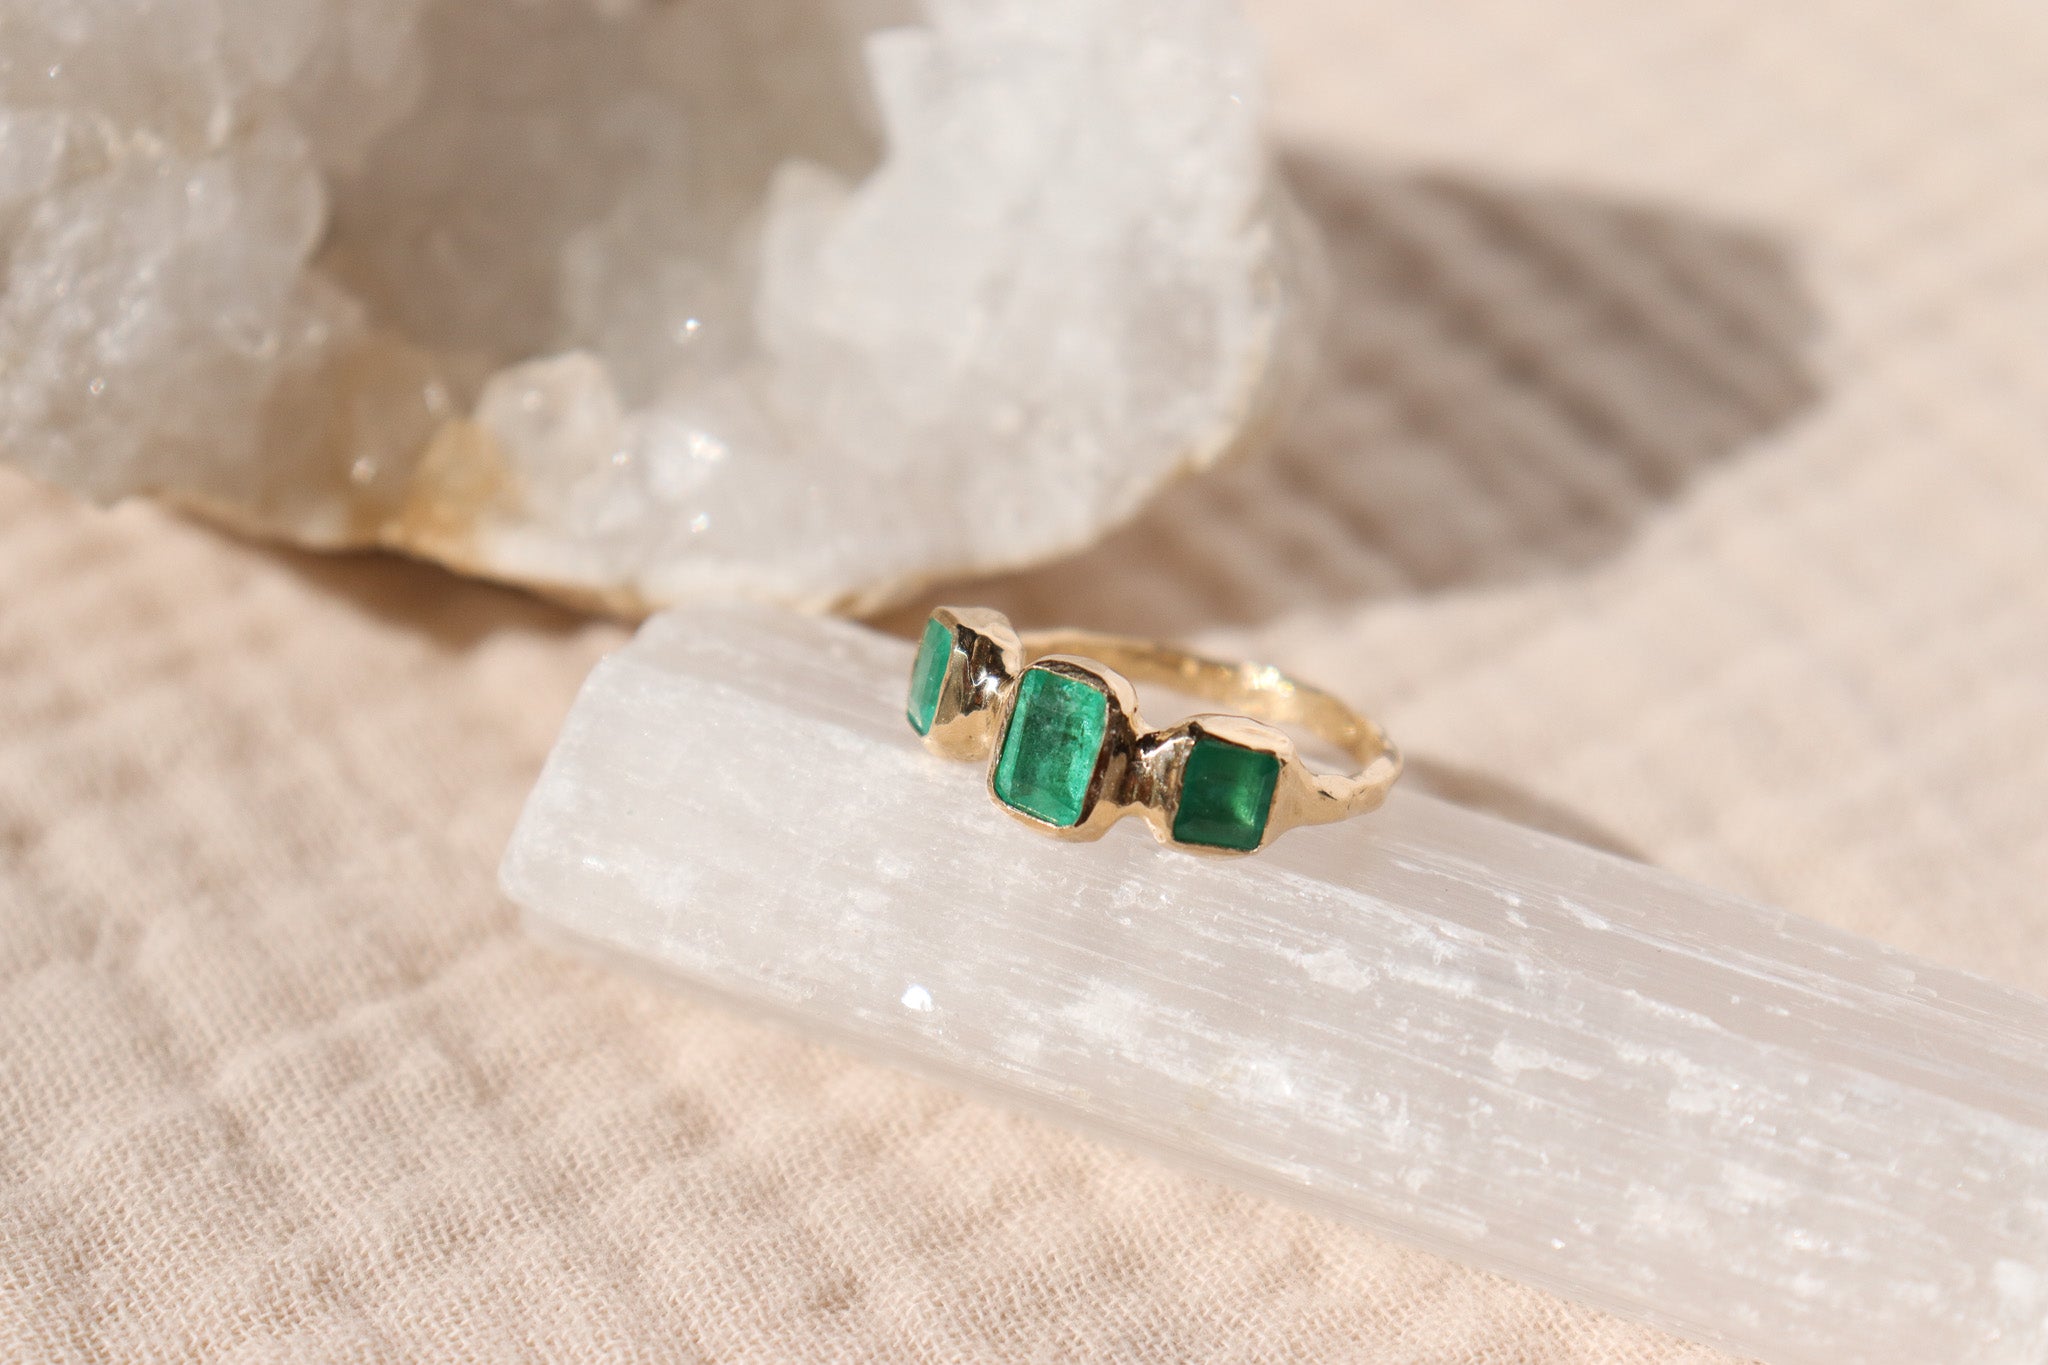 A 14k gold emerald trio ring is sitting atop a crystal on a cream surface.